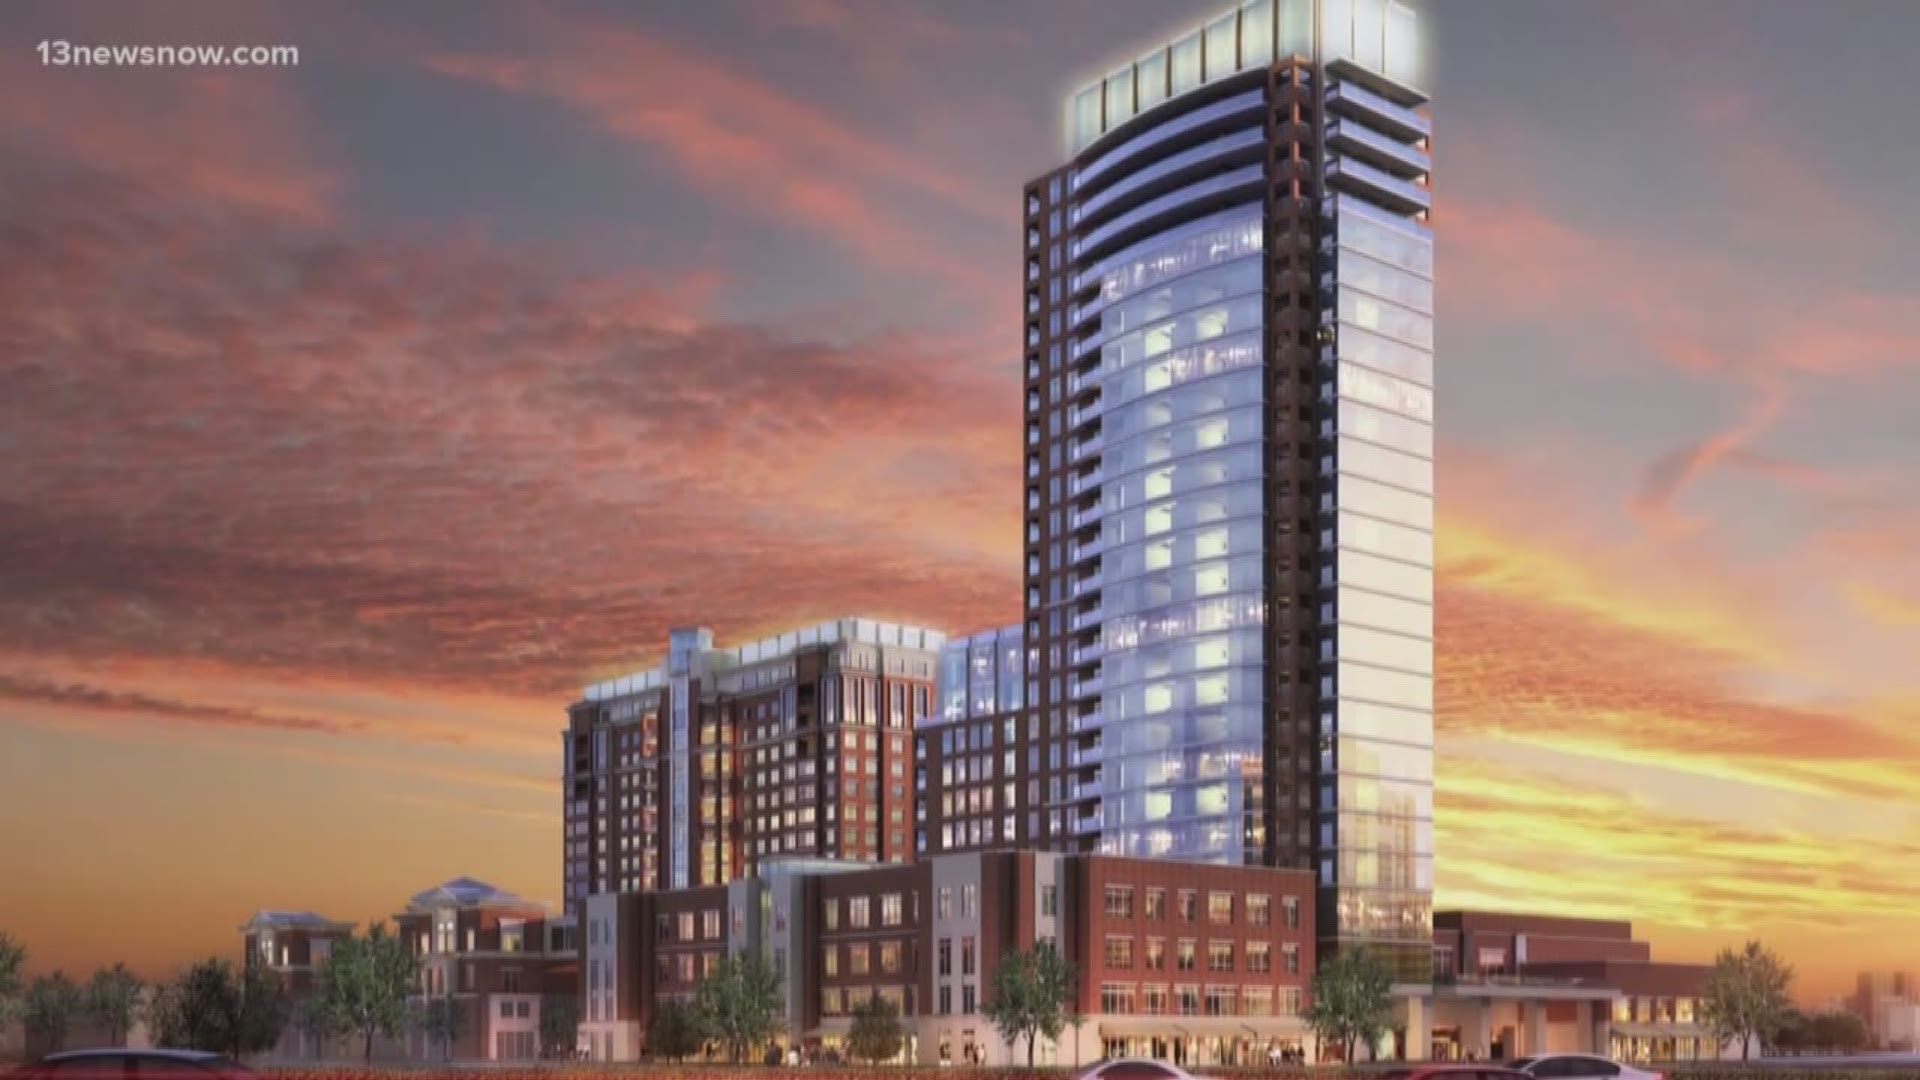 Developers broke ground on the Harbor's Edge River Tower expansion Wednesday.